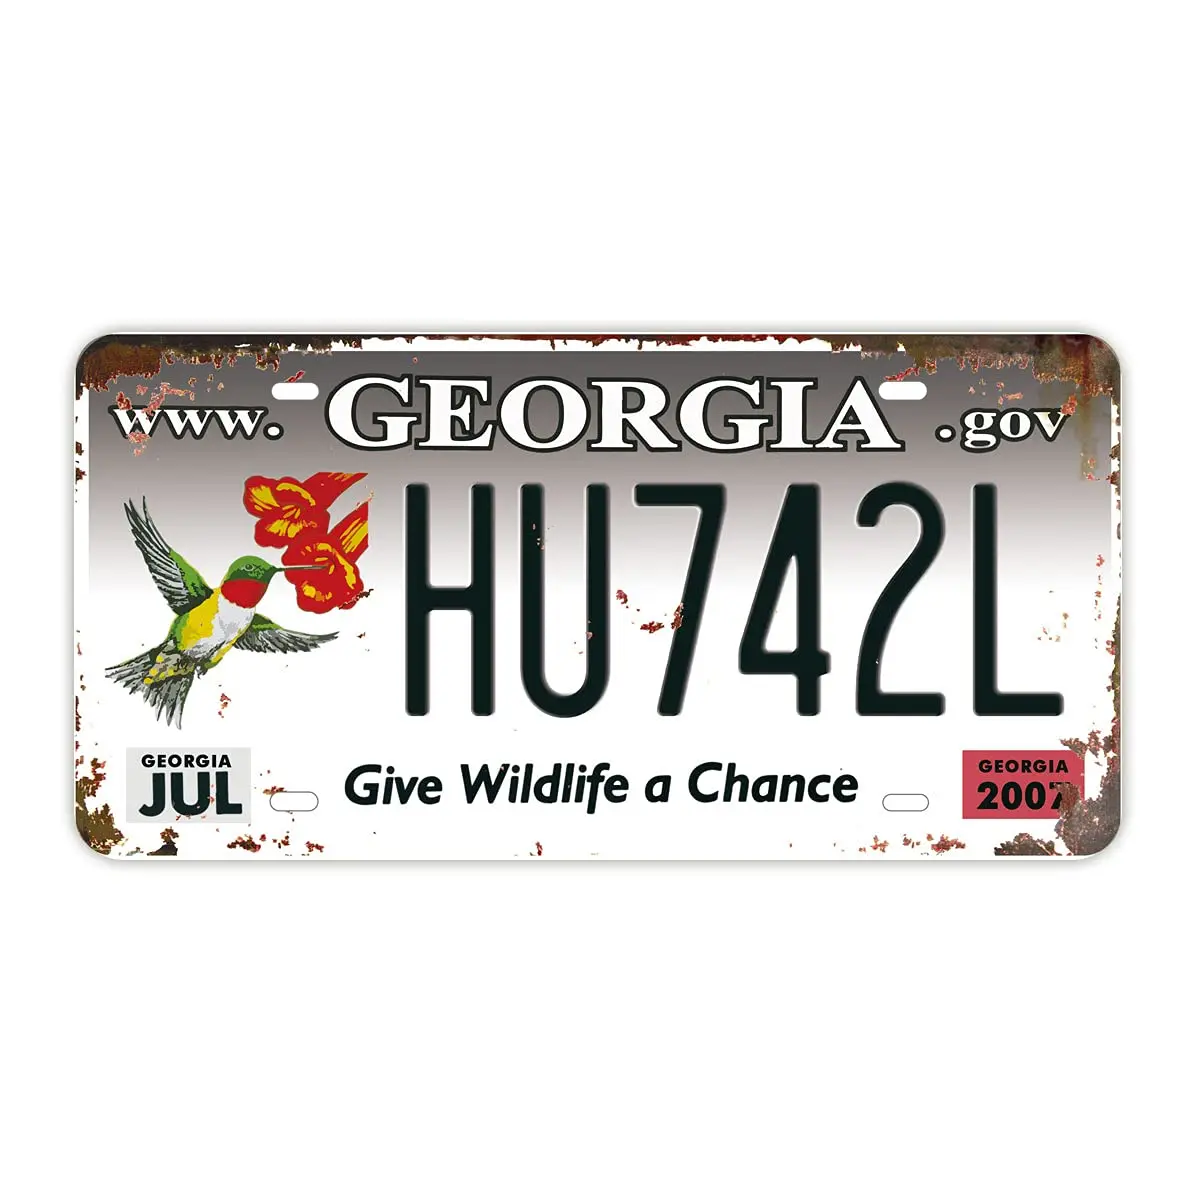 

Replica Vintage License Plate, State of Georgia, Embossed Novelty Metal Number Tags, Prop Car Registration Plates, 12x6 Inch